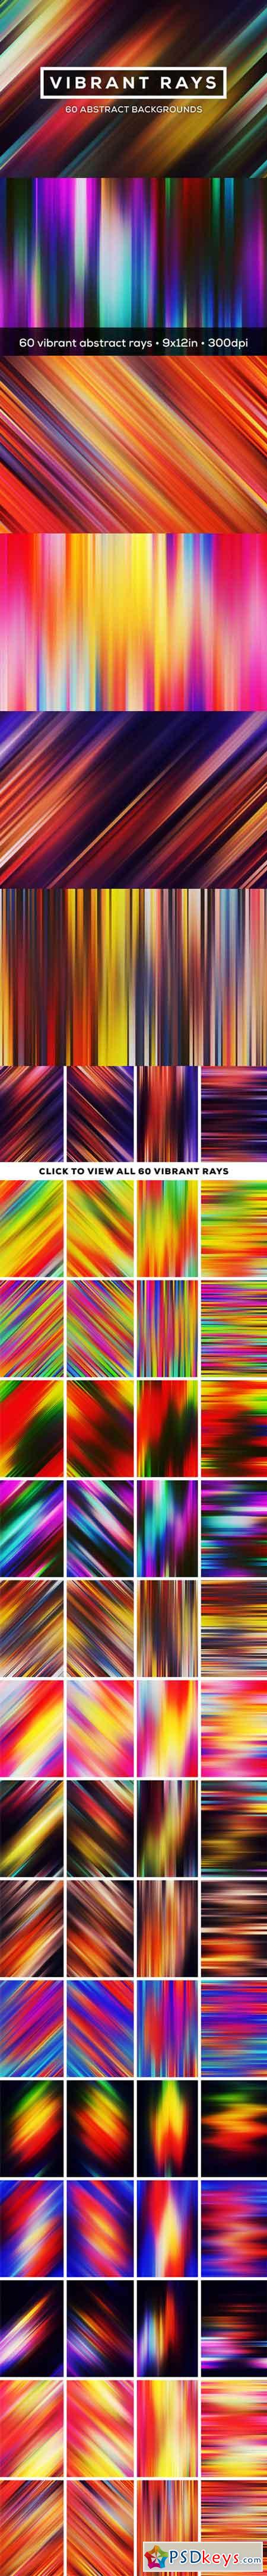 Vibrant Rays 60 Ray Backgrounds 772984